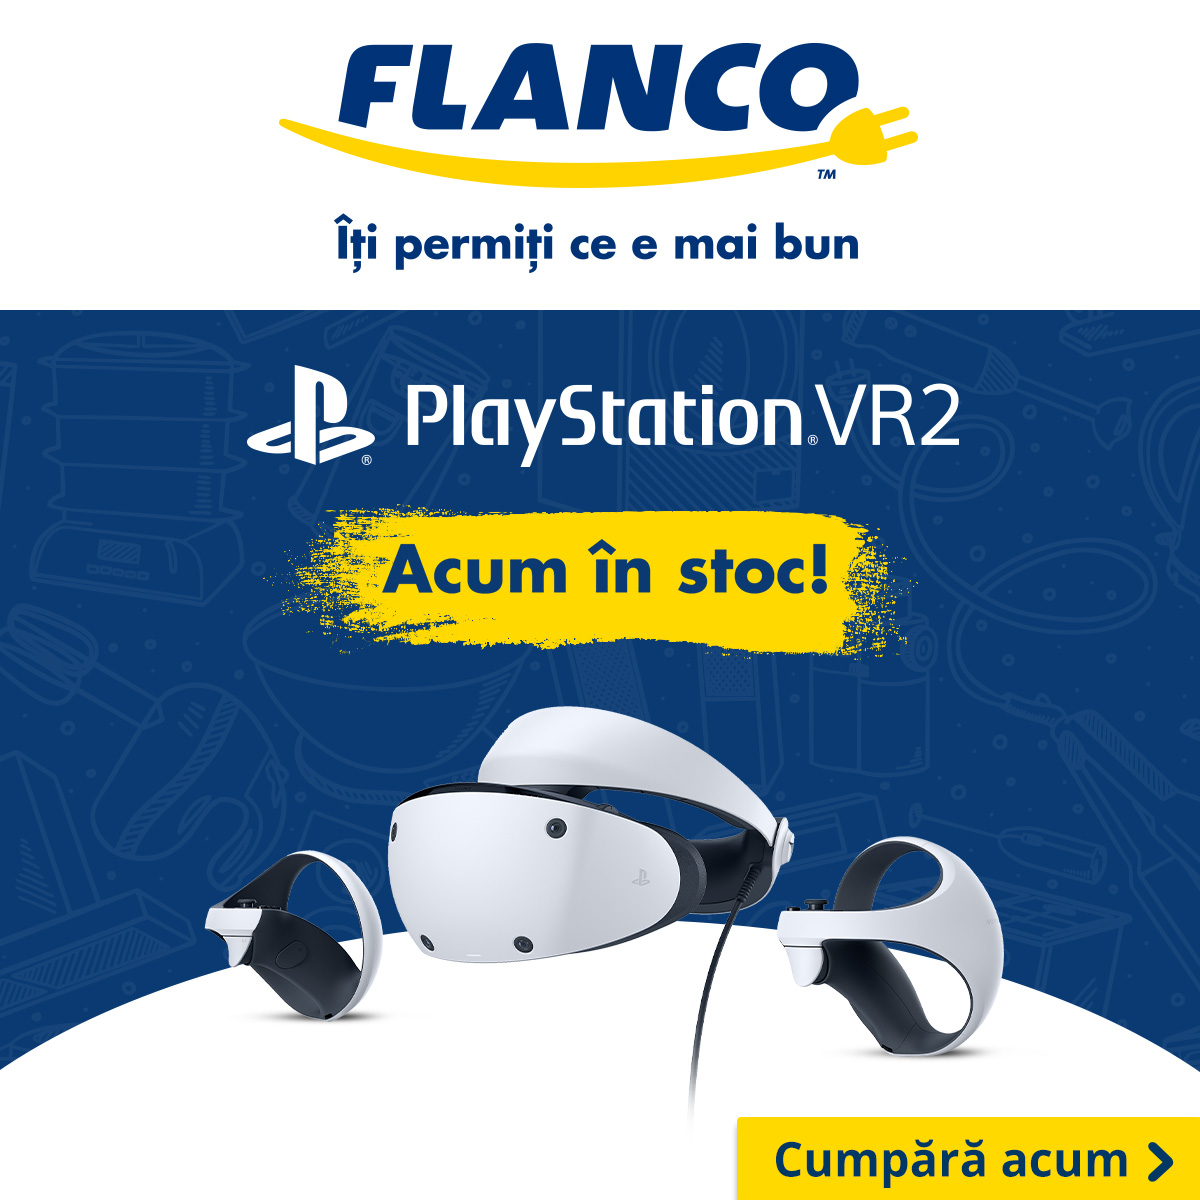 Flanco - PLAYSTATION VR ACUM IN STOC